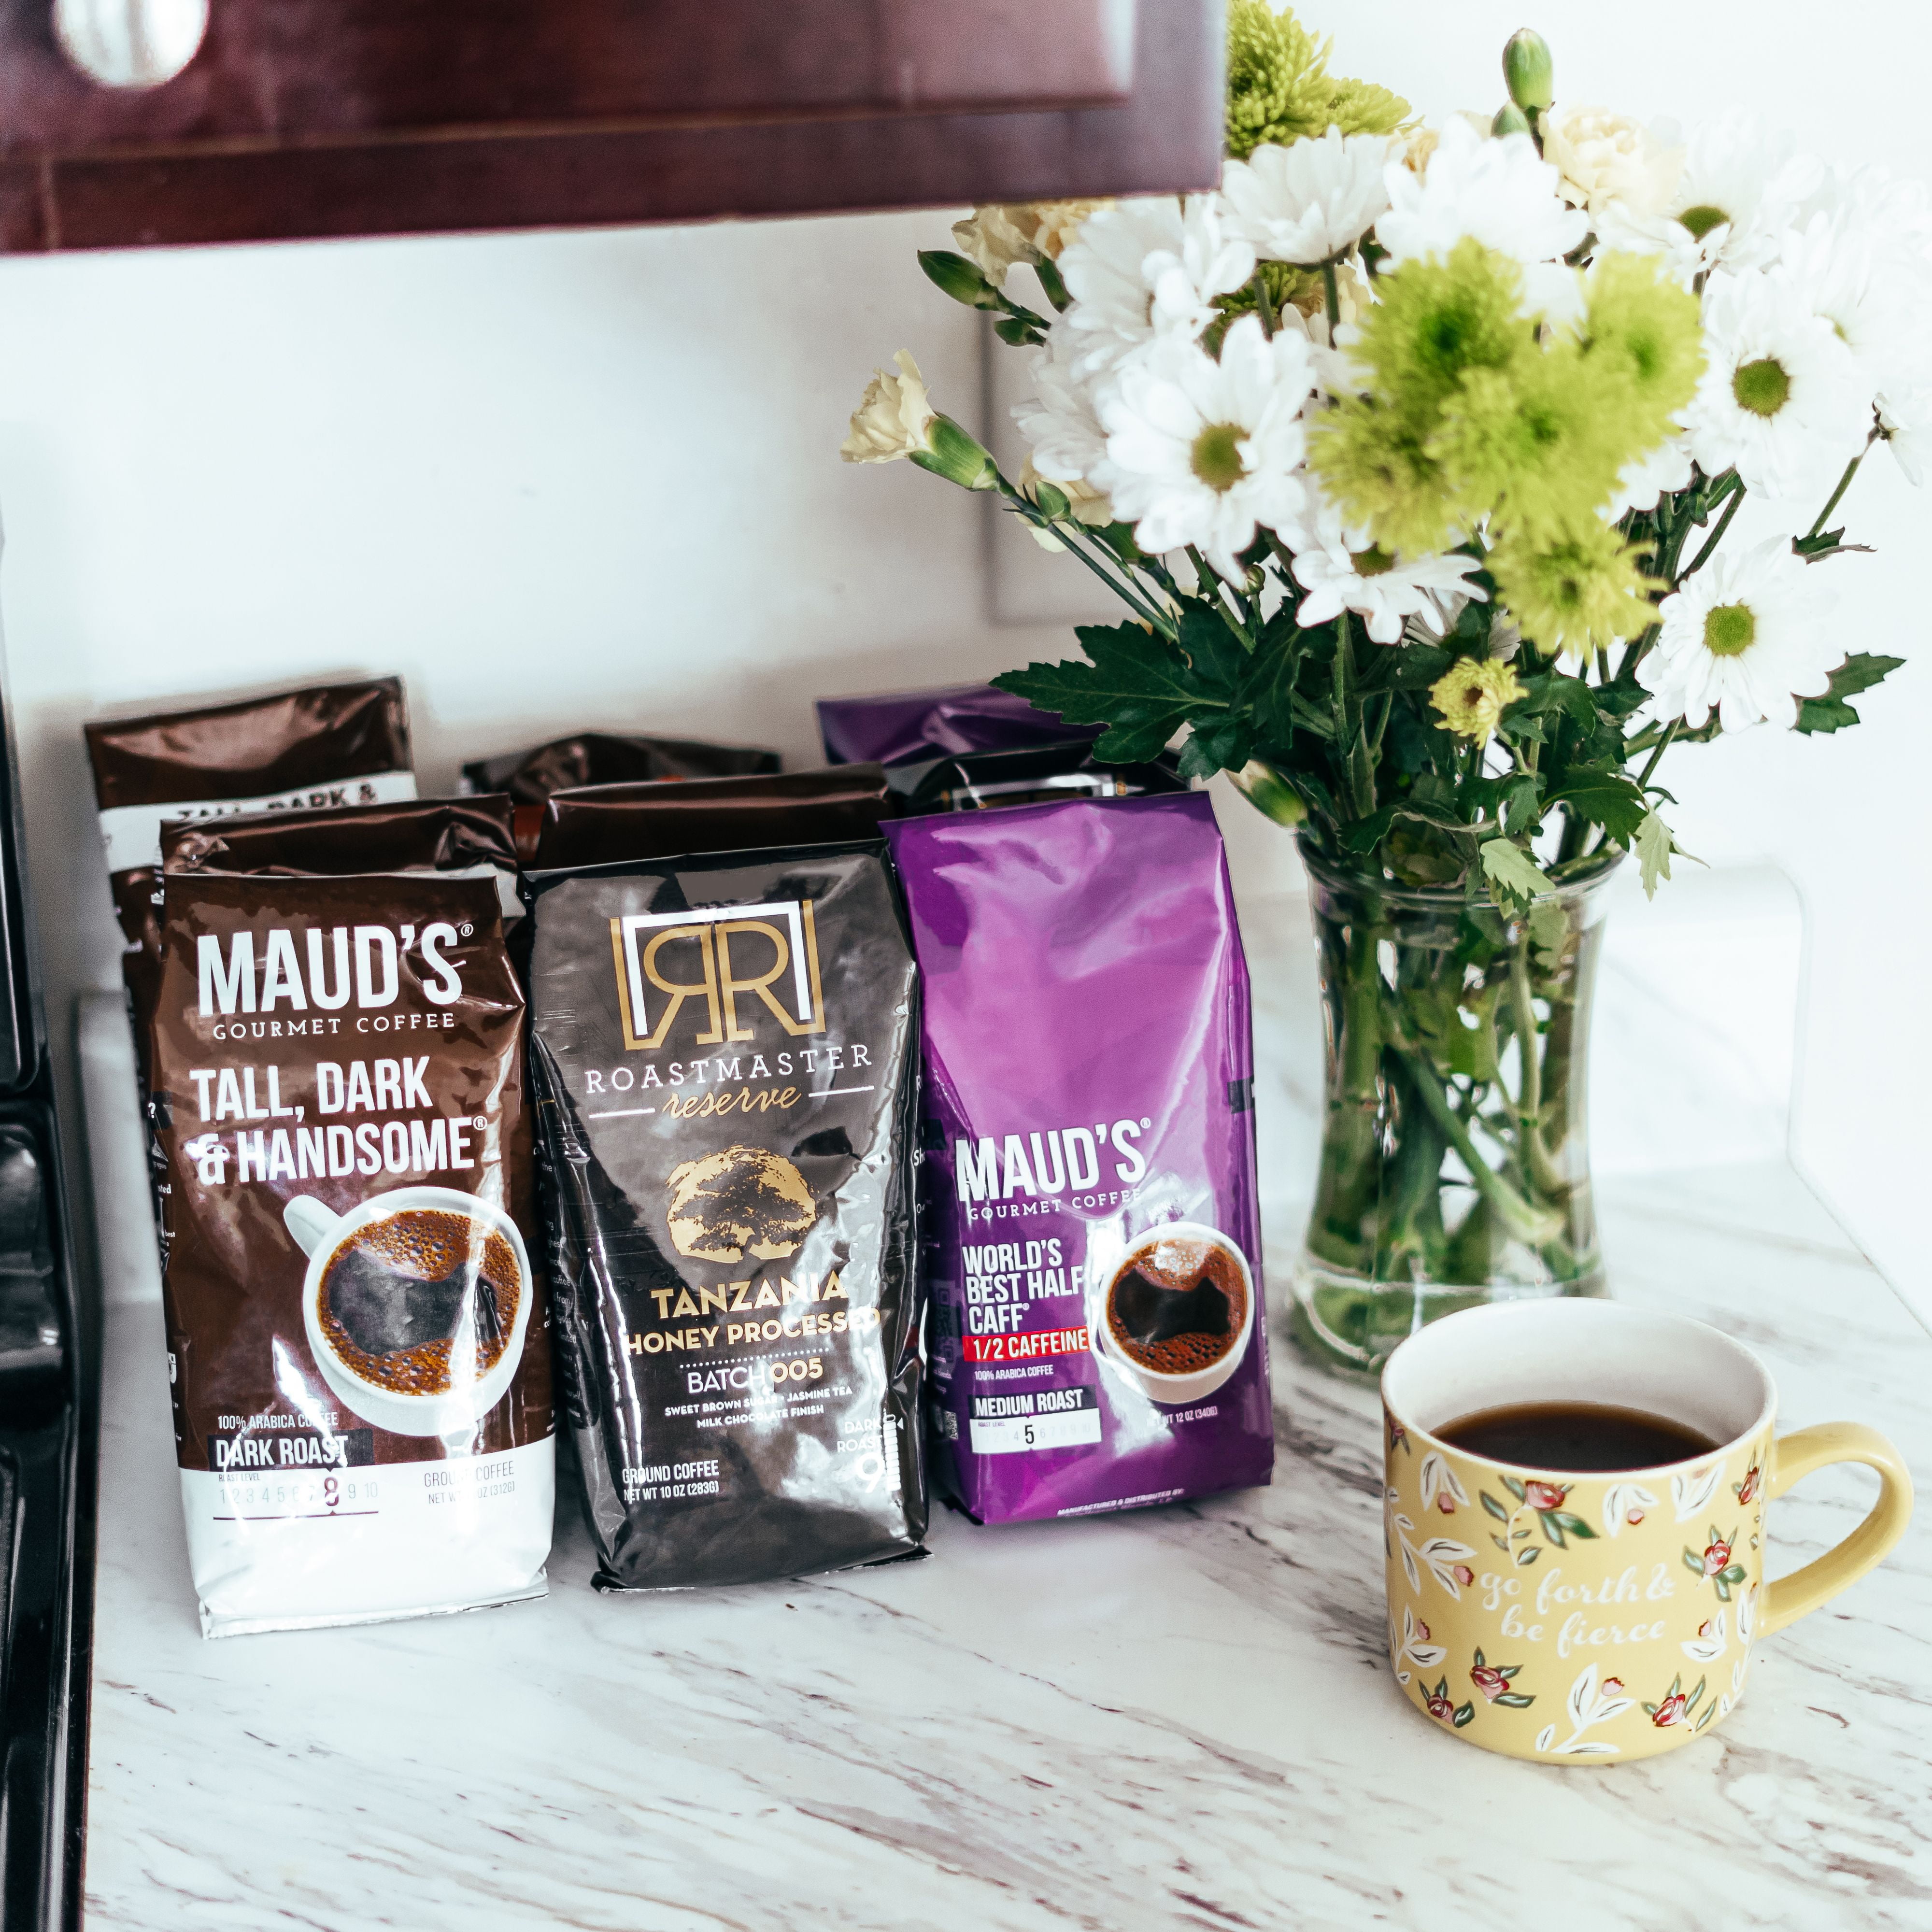 Gran Café Variety Pack - the best coffee quality for your